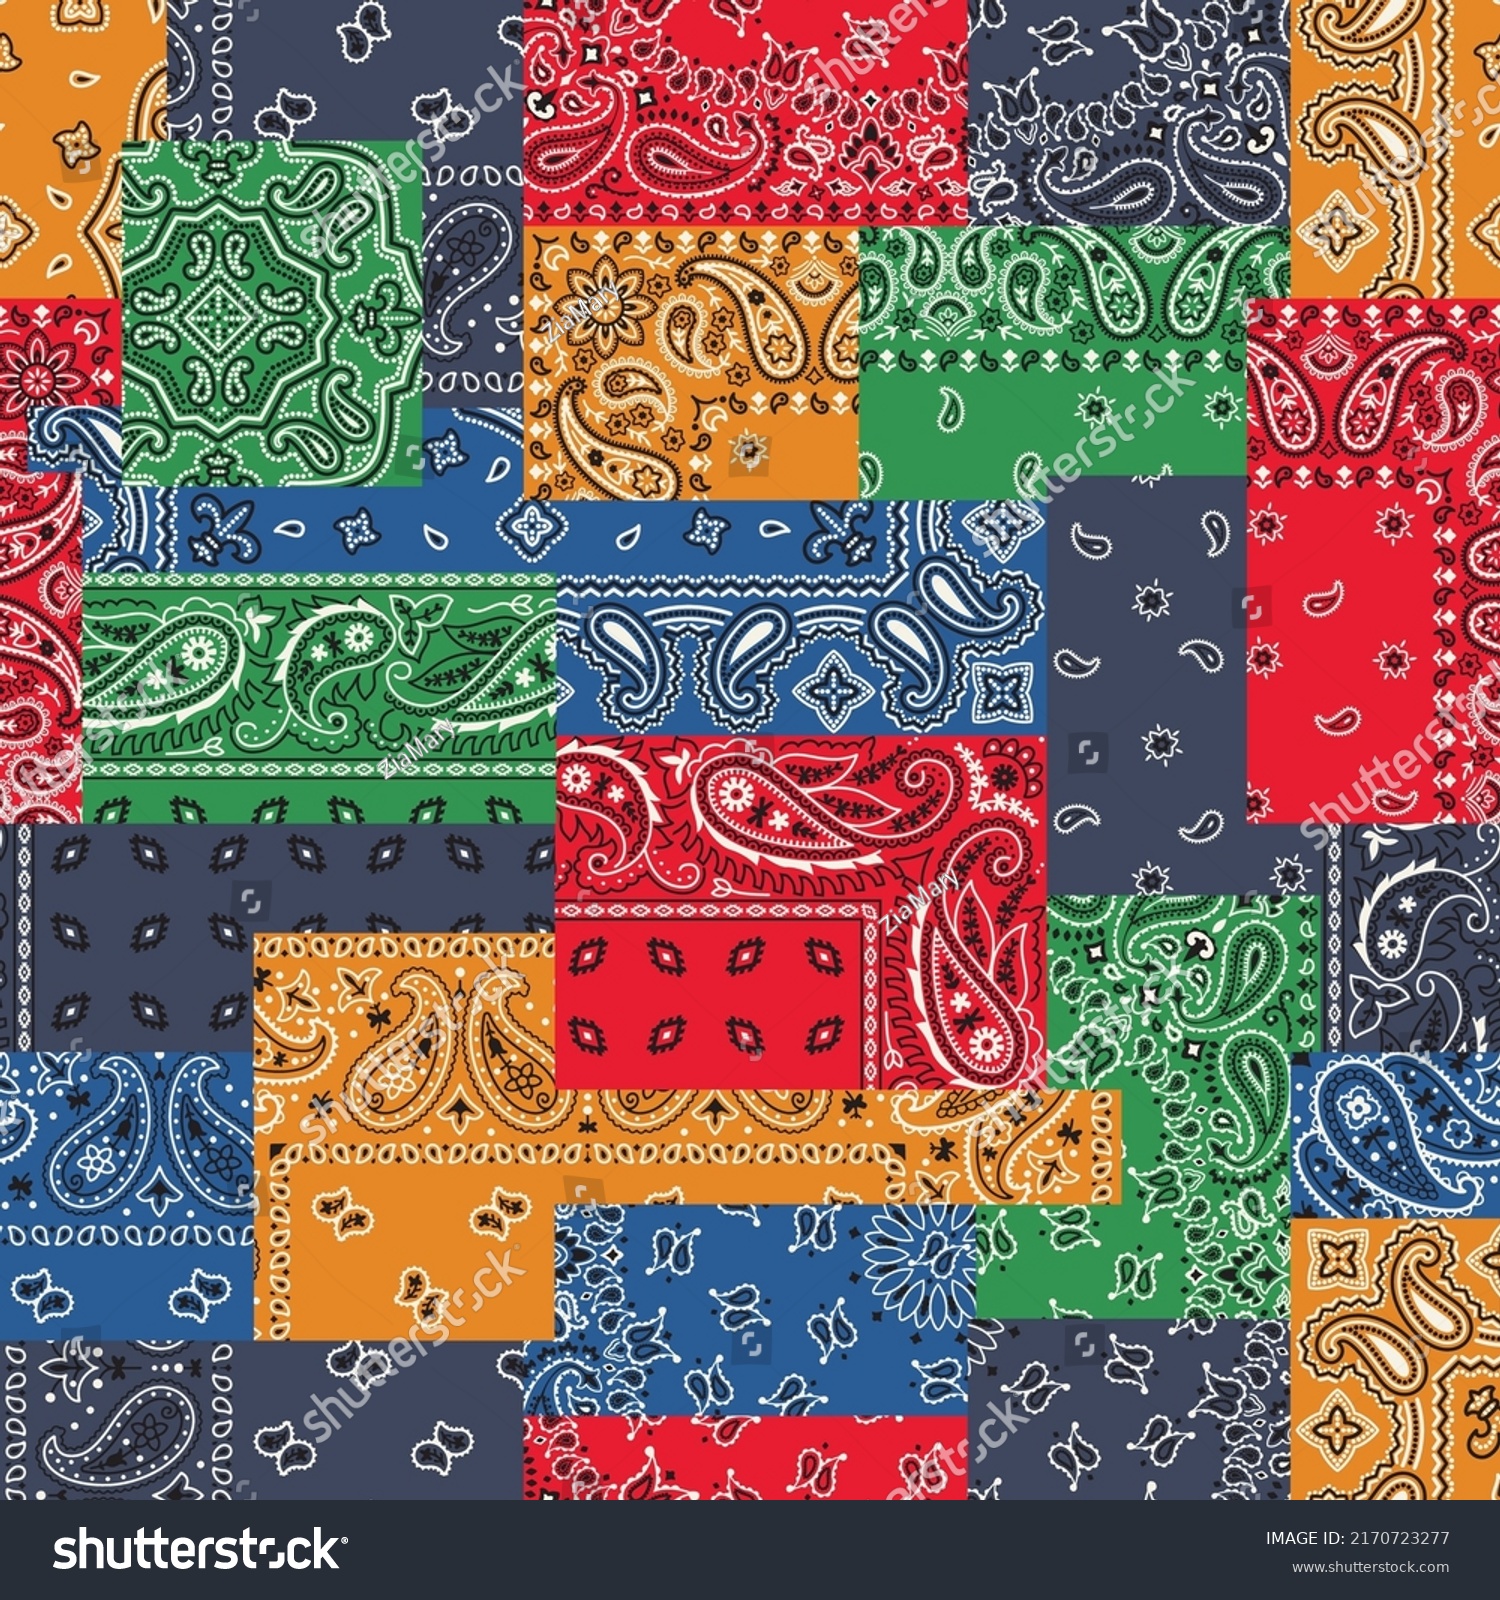 SVG of Colorful paisley bandana fabric patchwork abstract vector seamless pattern svg